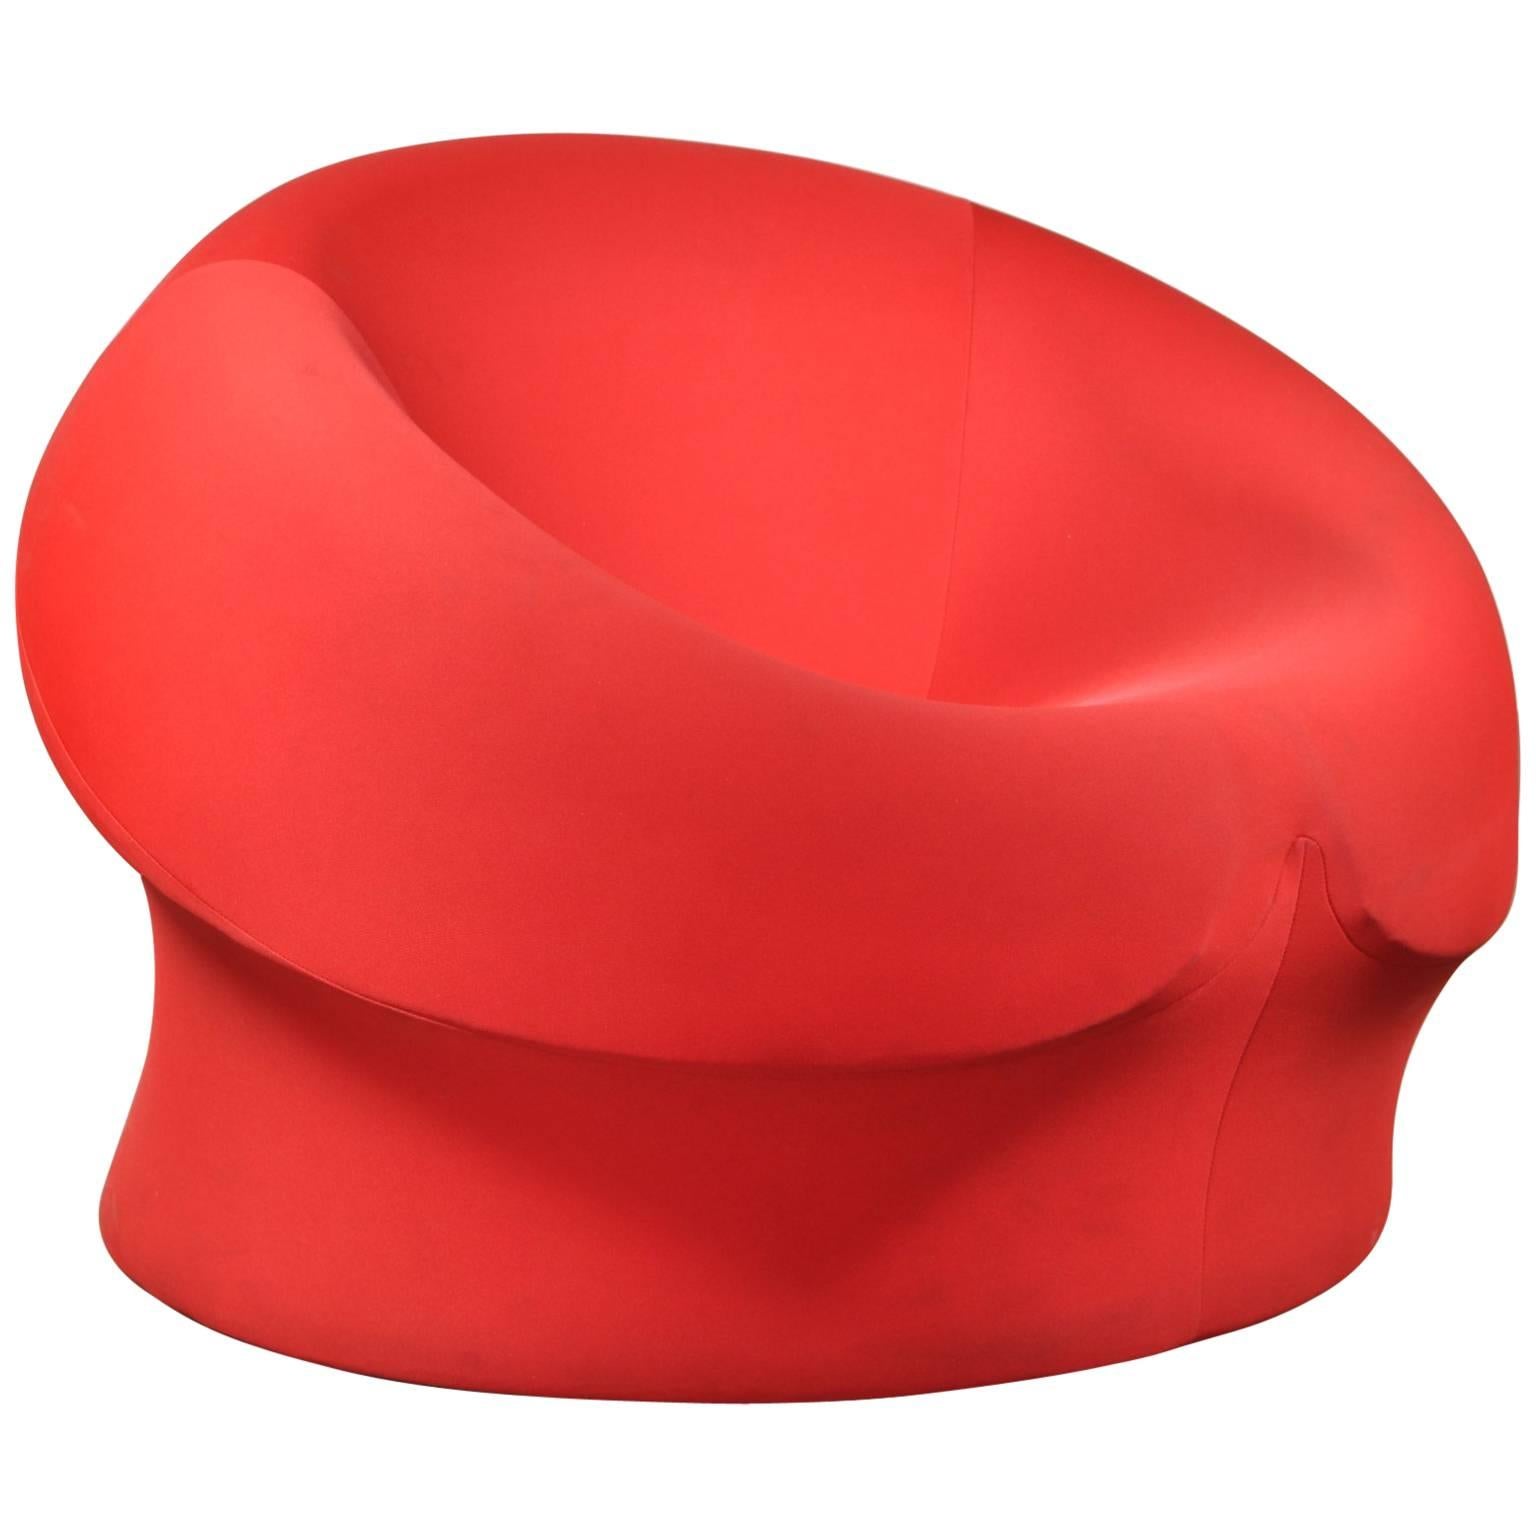 UP3 Up 2000 Series by B&B Italia by Gaetano Pesce For Sale